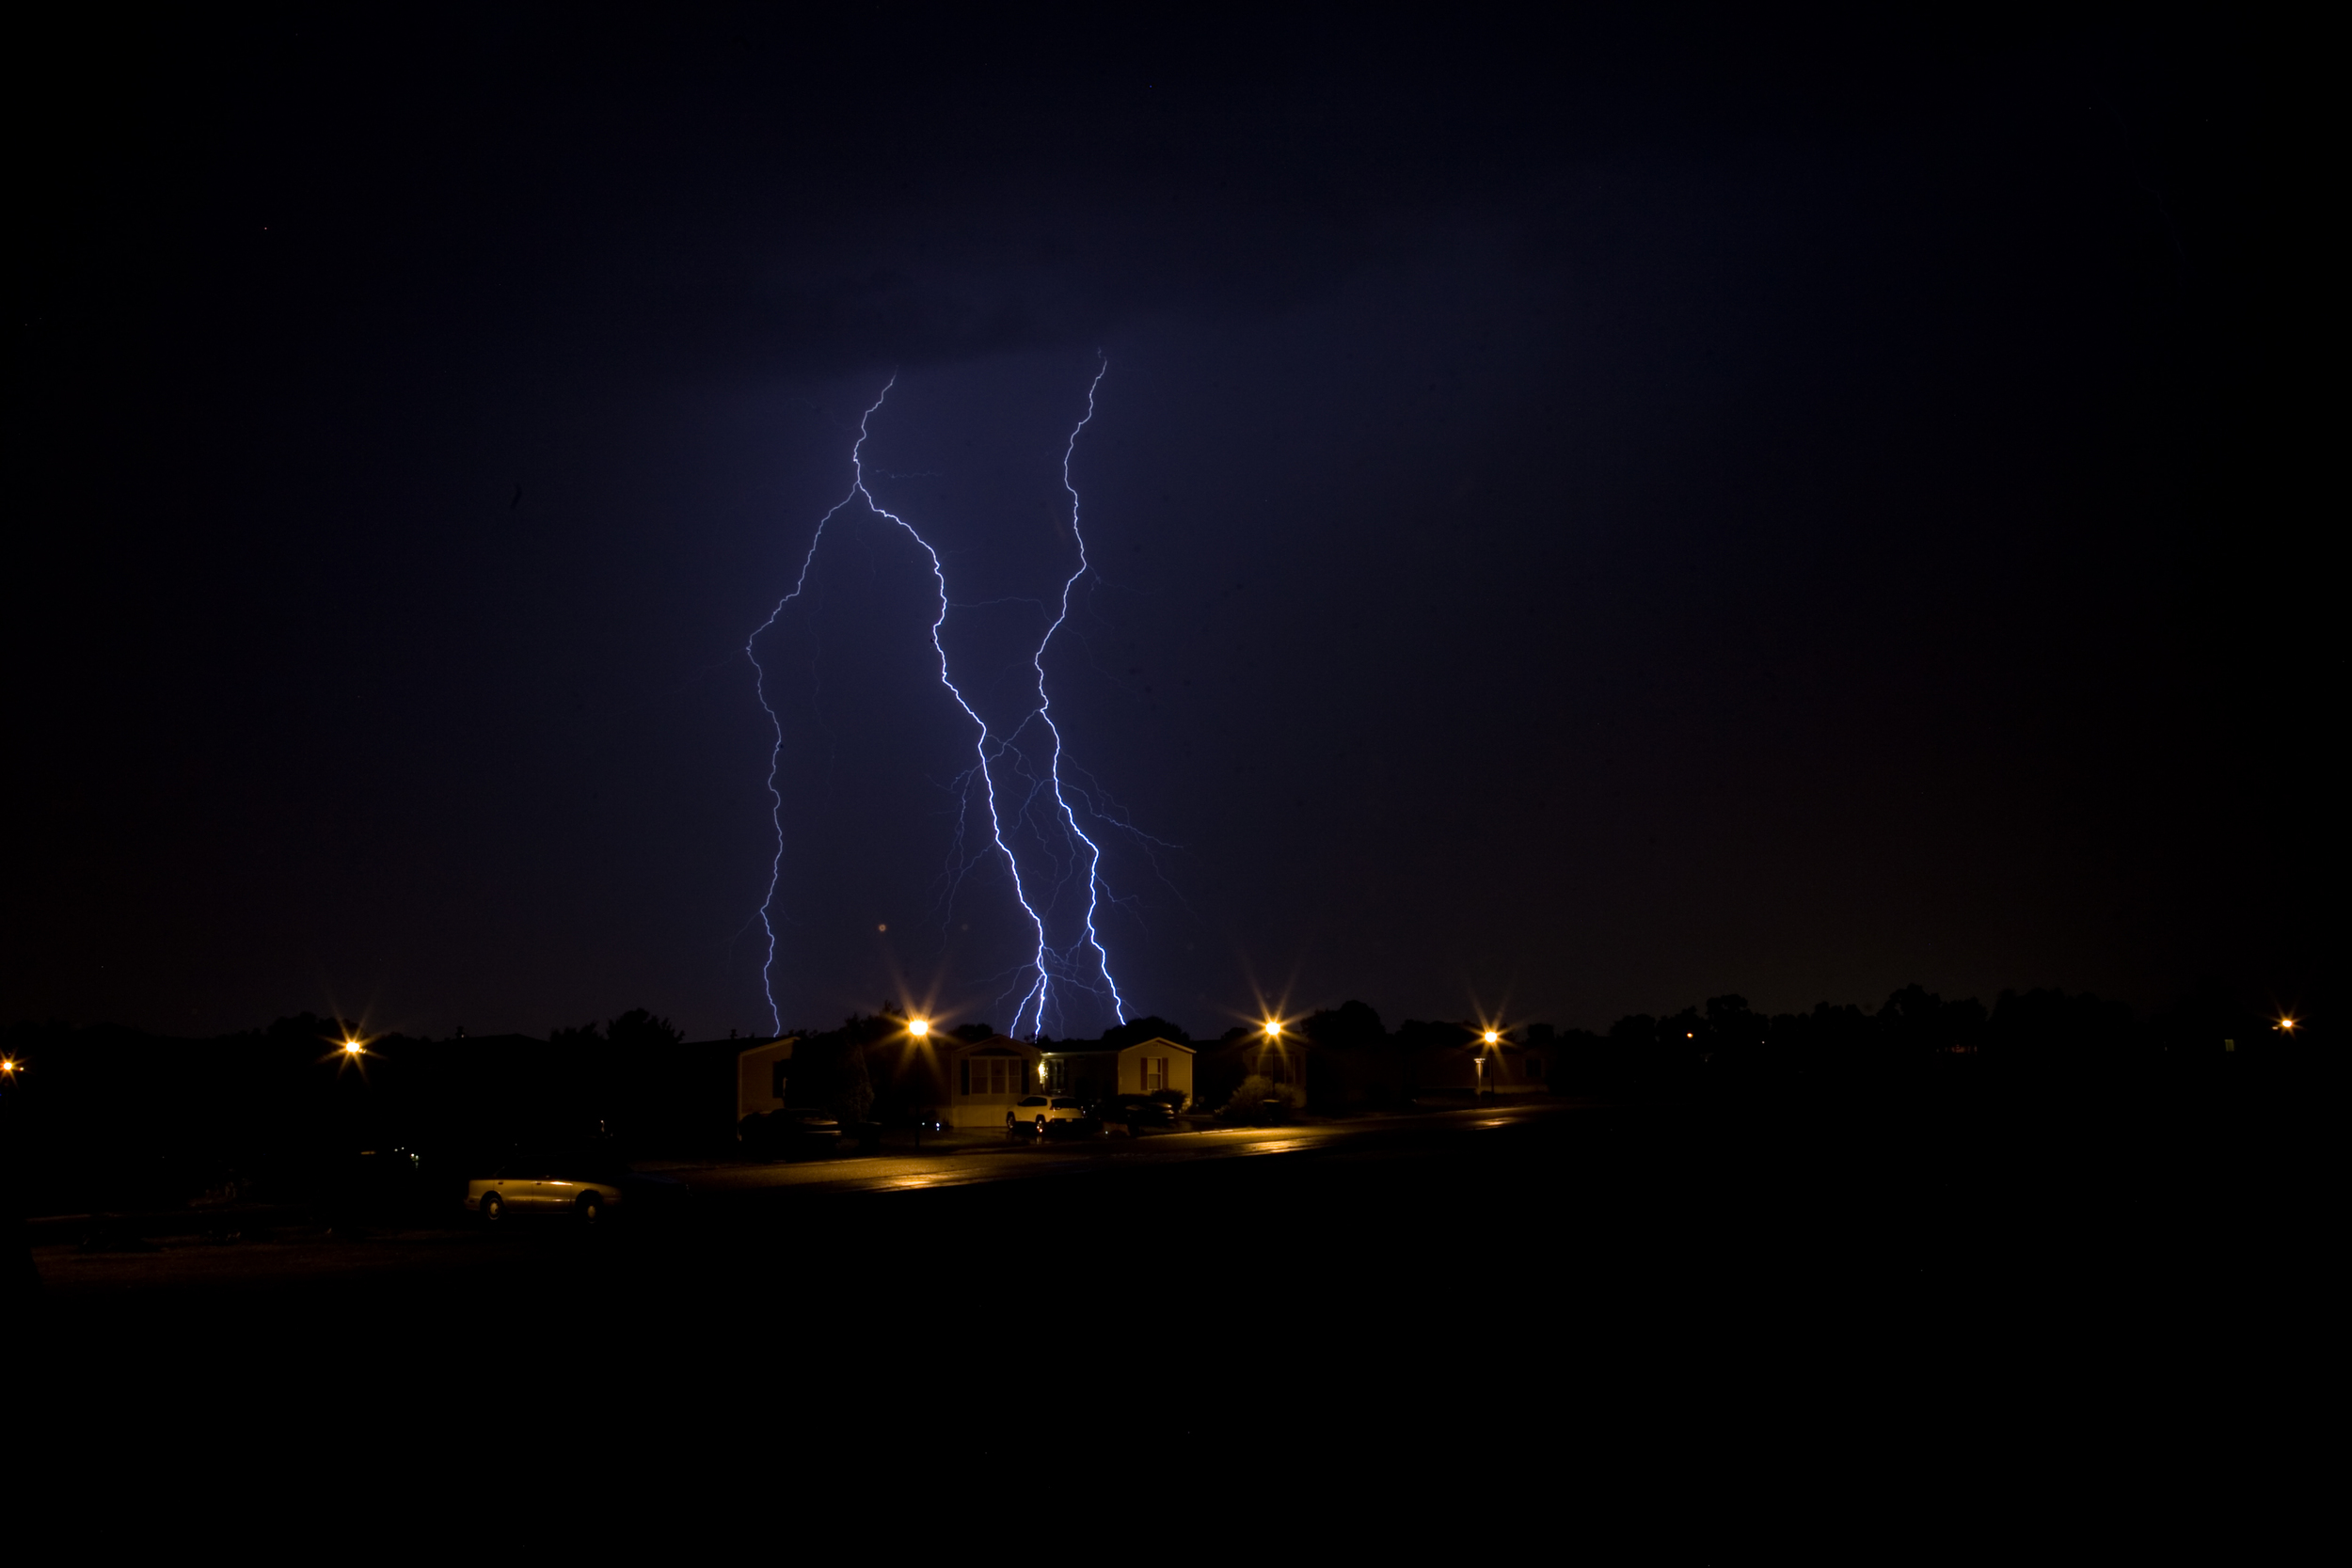  Lightnign strikes from a storm that passed through the Bear, Delaware area on June 20, 2014 